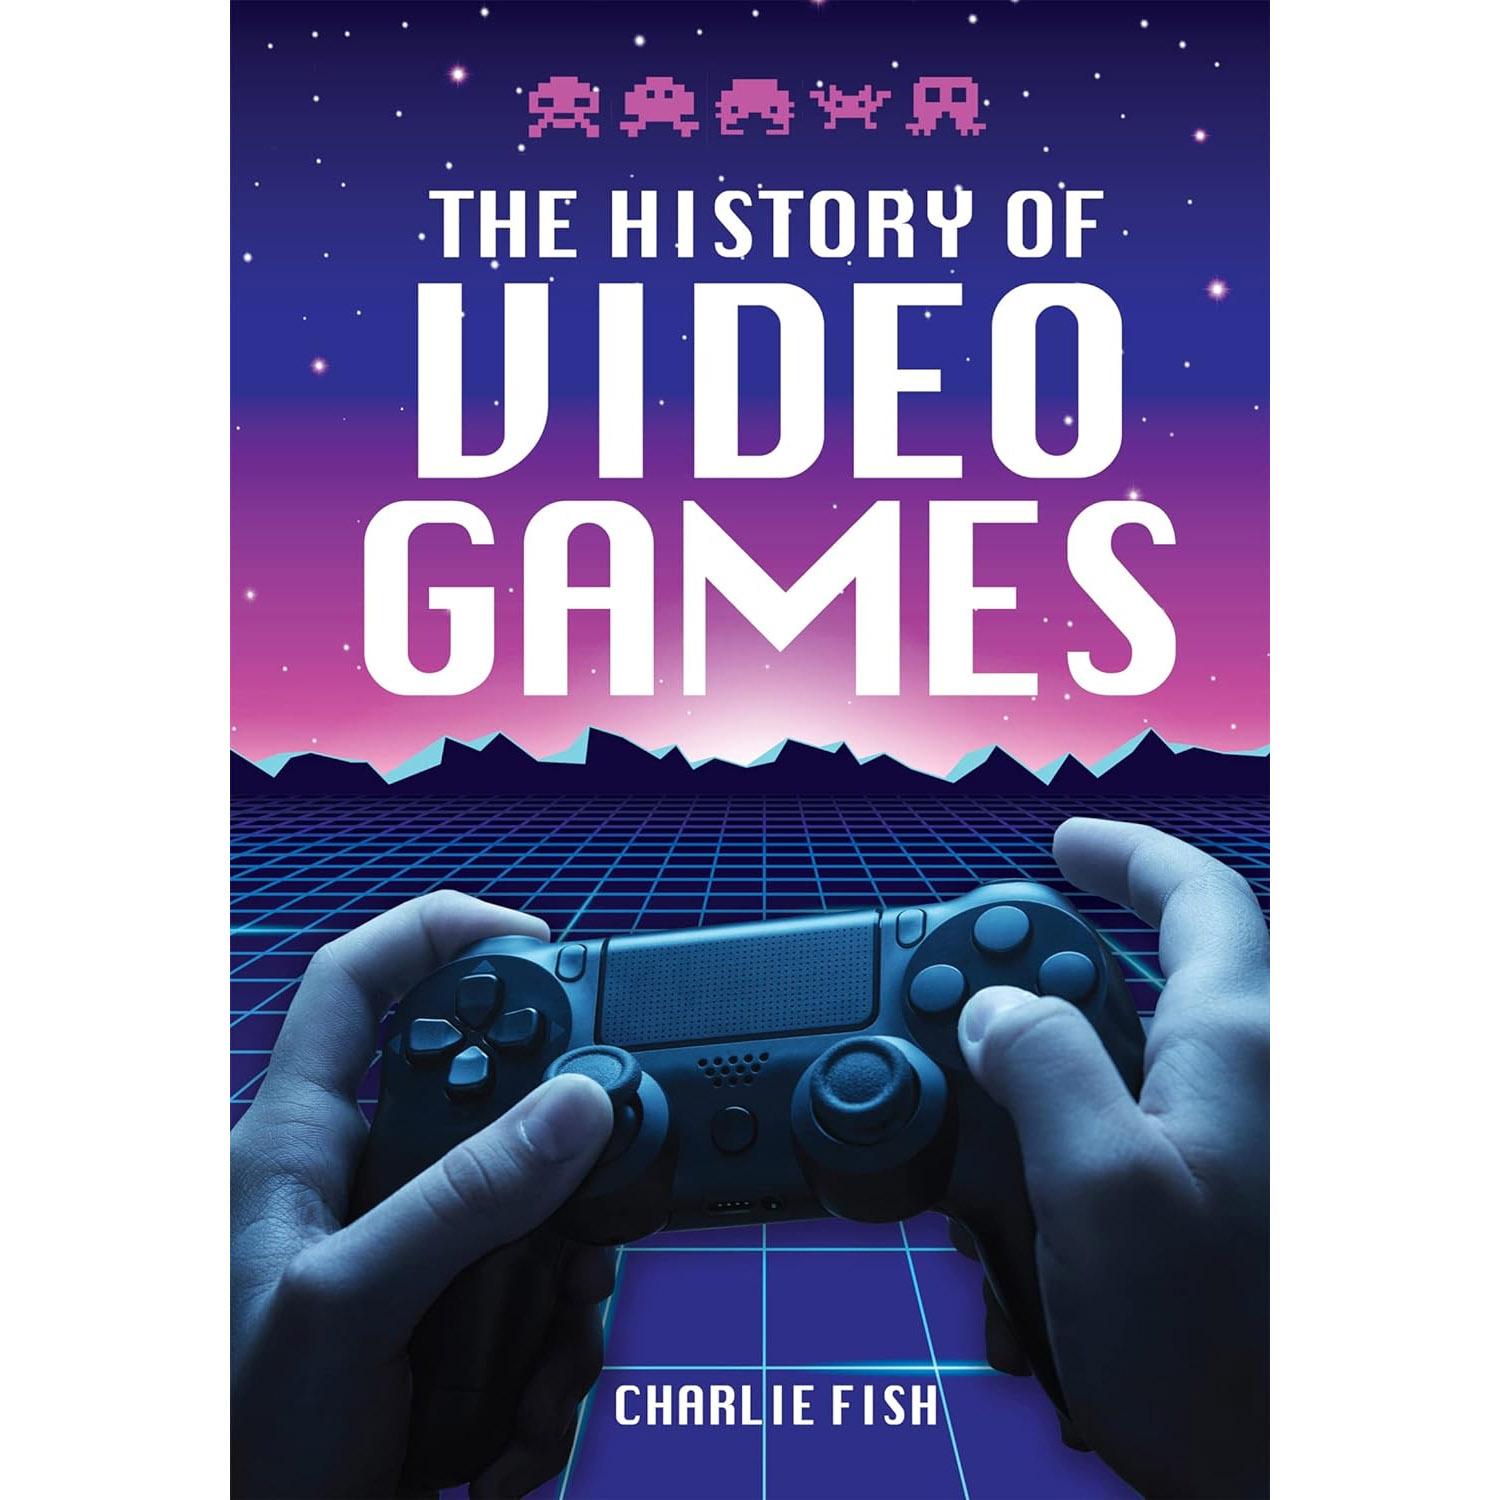 The History of Video Games eBook for $0.25